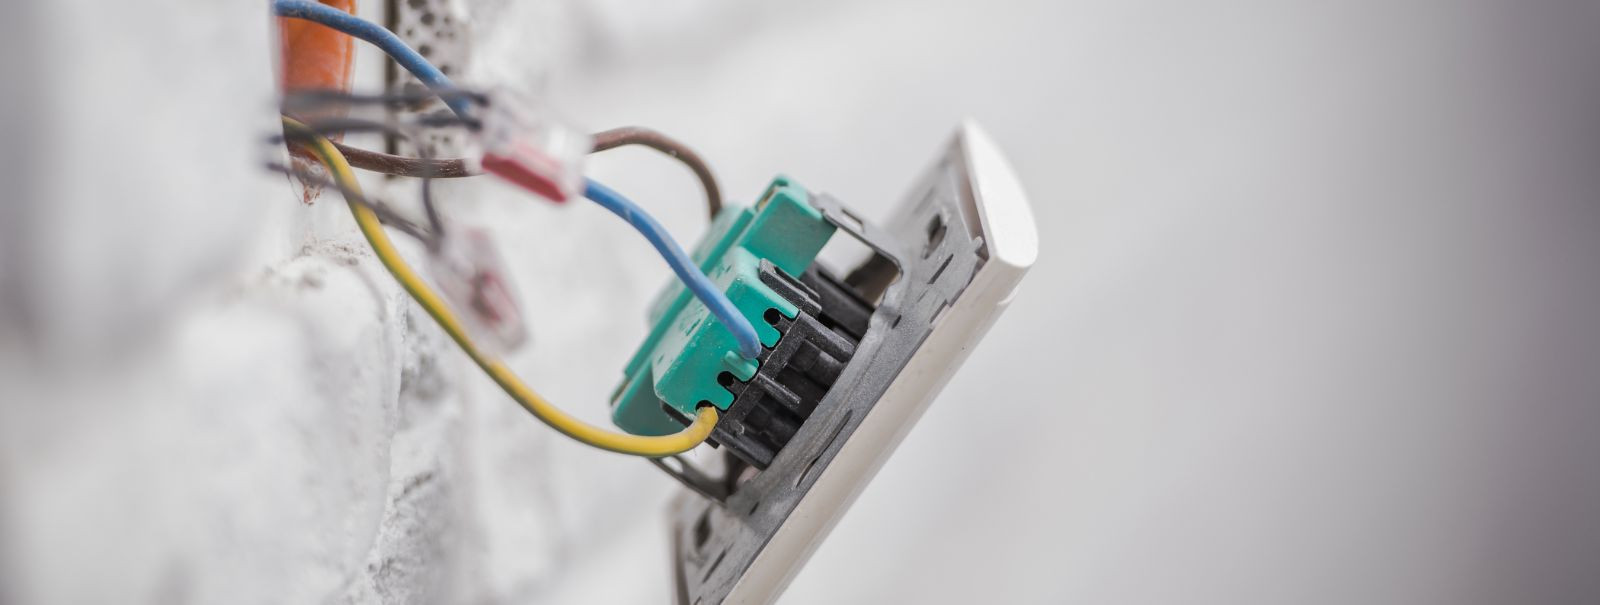 Electrical systems are the lifeblood of any industrial facility, commercial business, or government entity. Ensuring these systems are in top condition is cruci